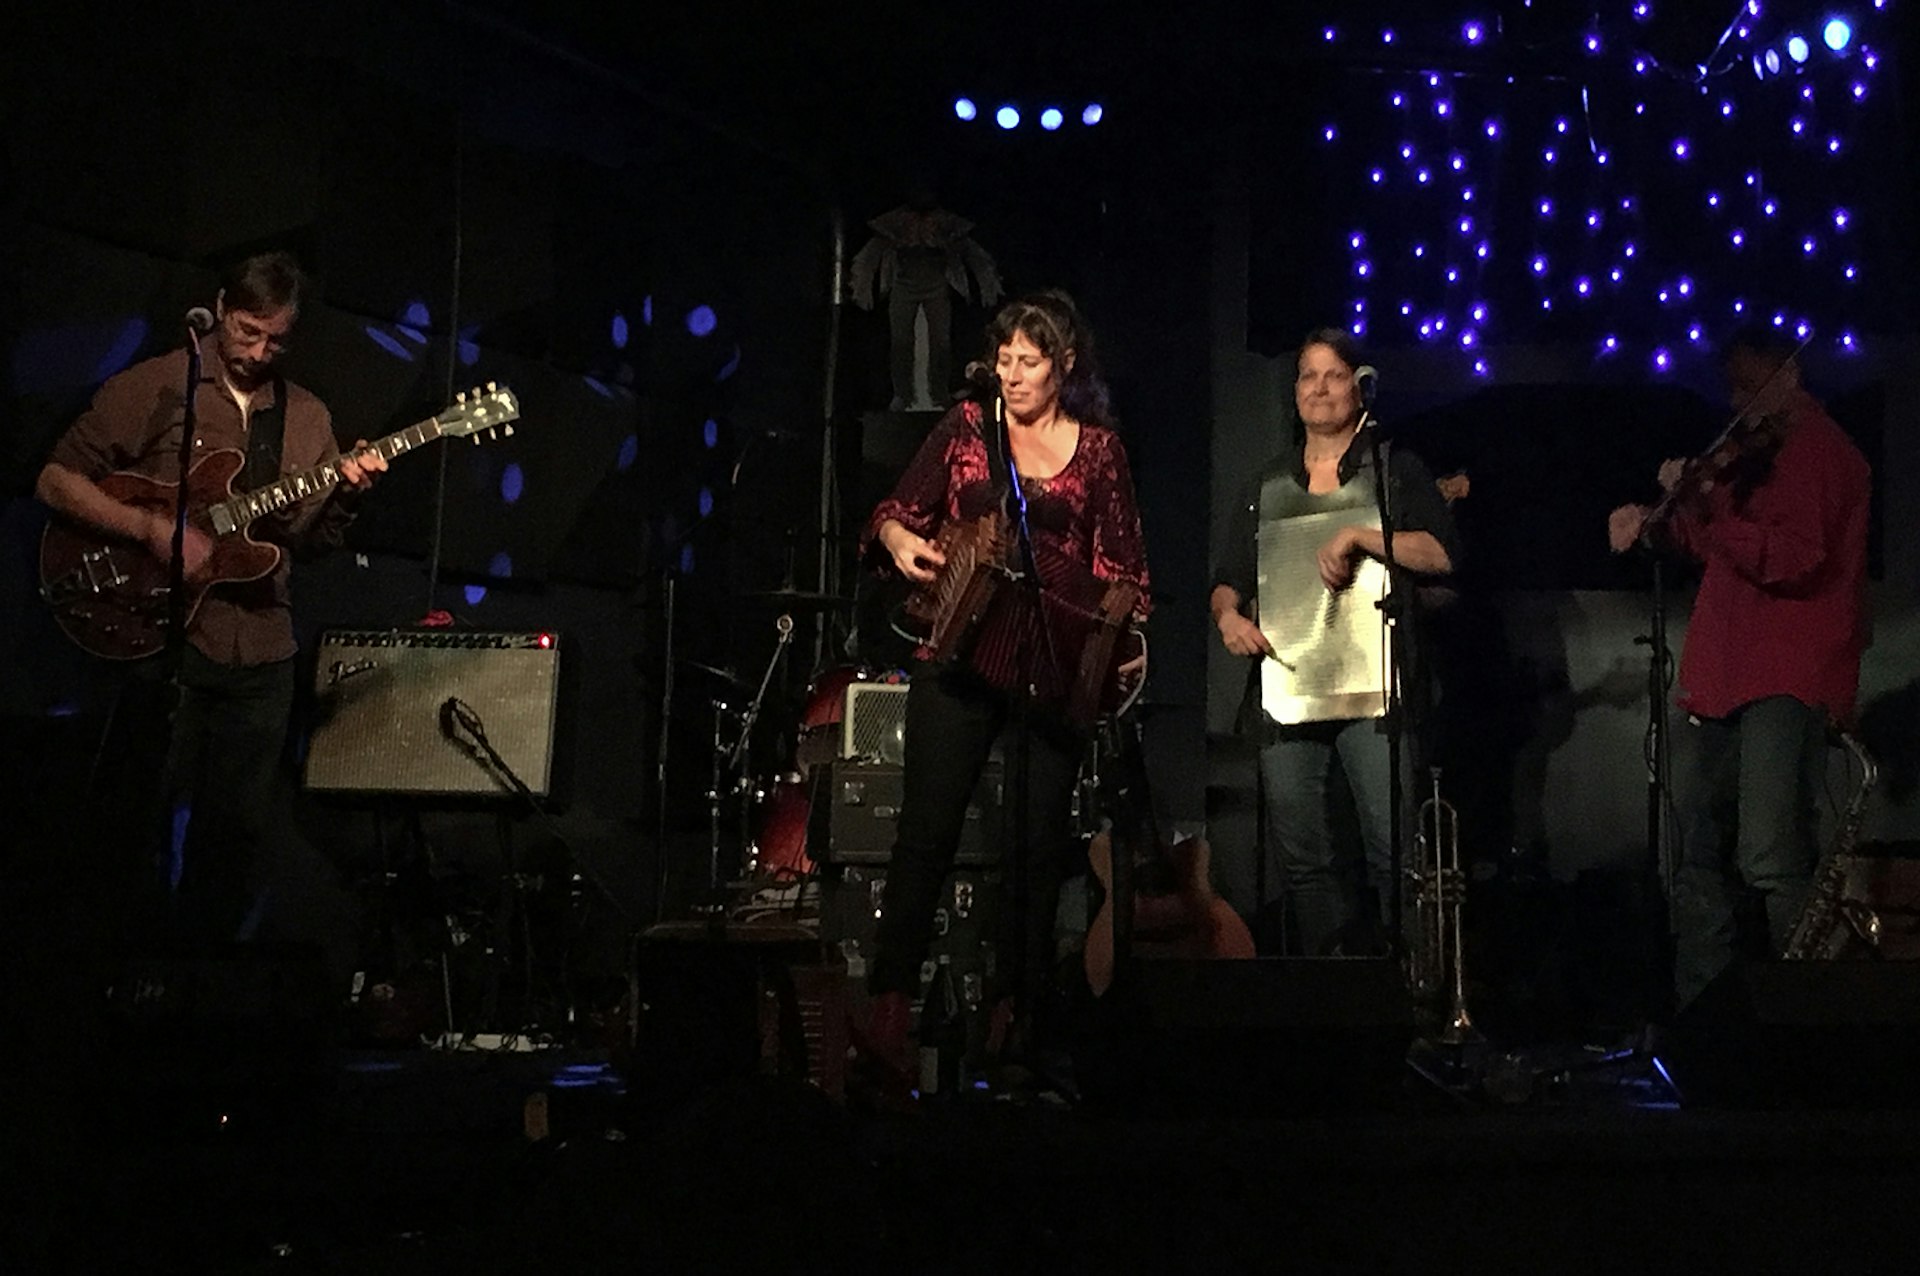 A man with a guitar, a woman singing, a woman with a washboard and a man on a flute perform music on stage in a dark club